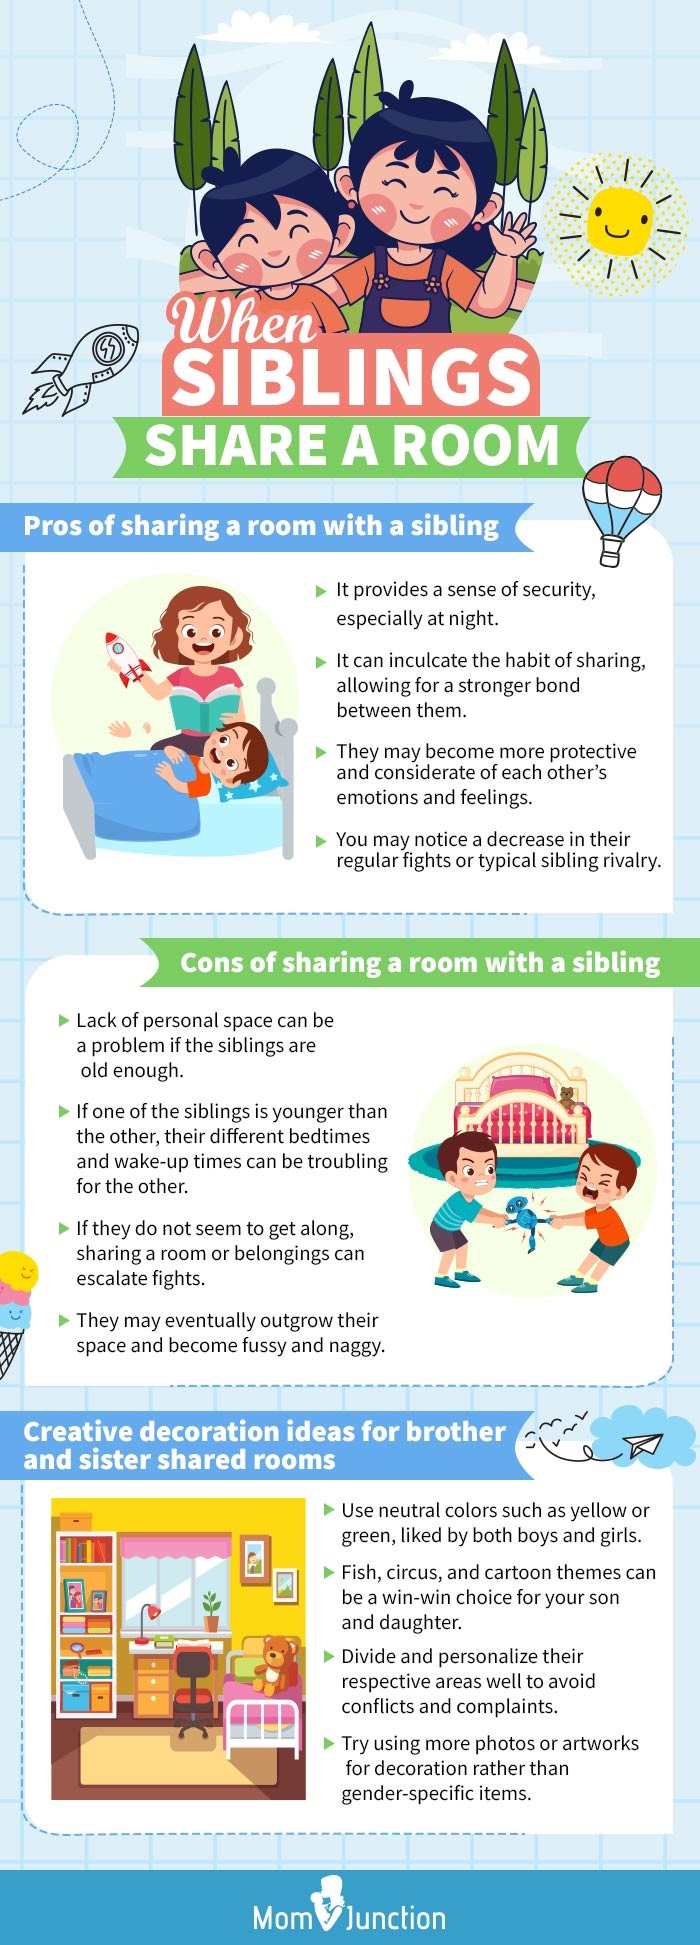 when siblings share a room (infographic)